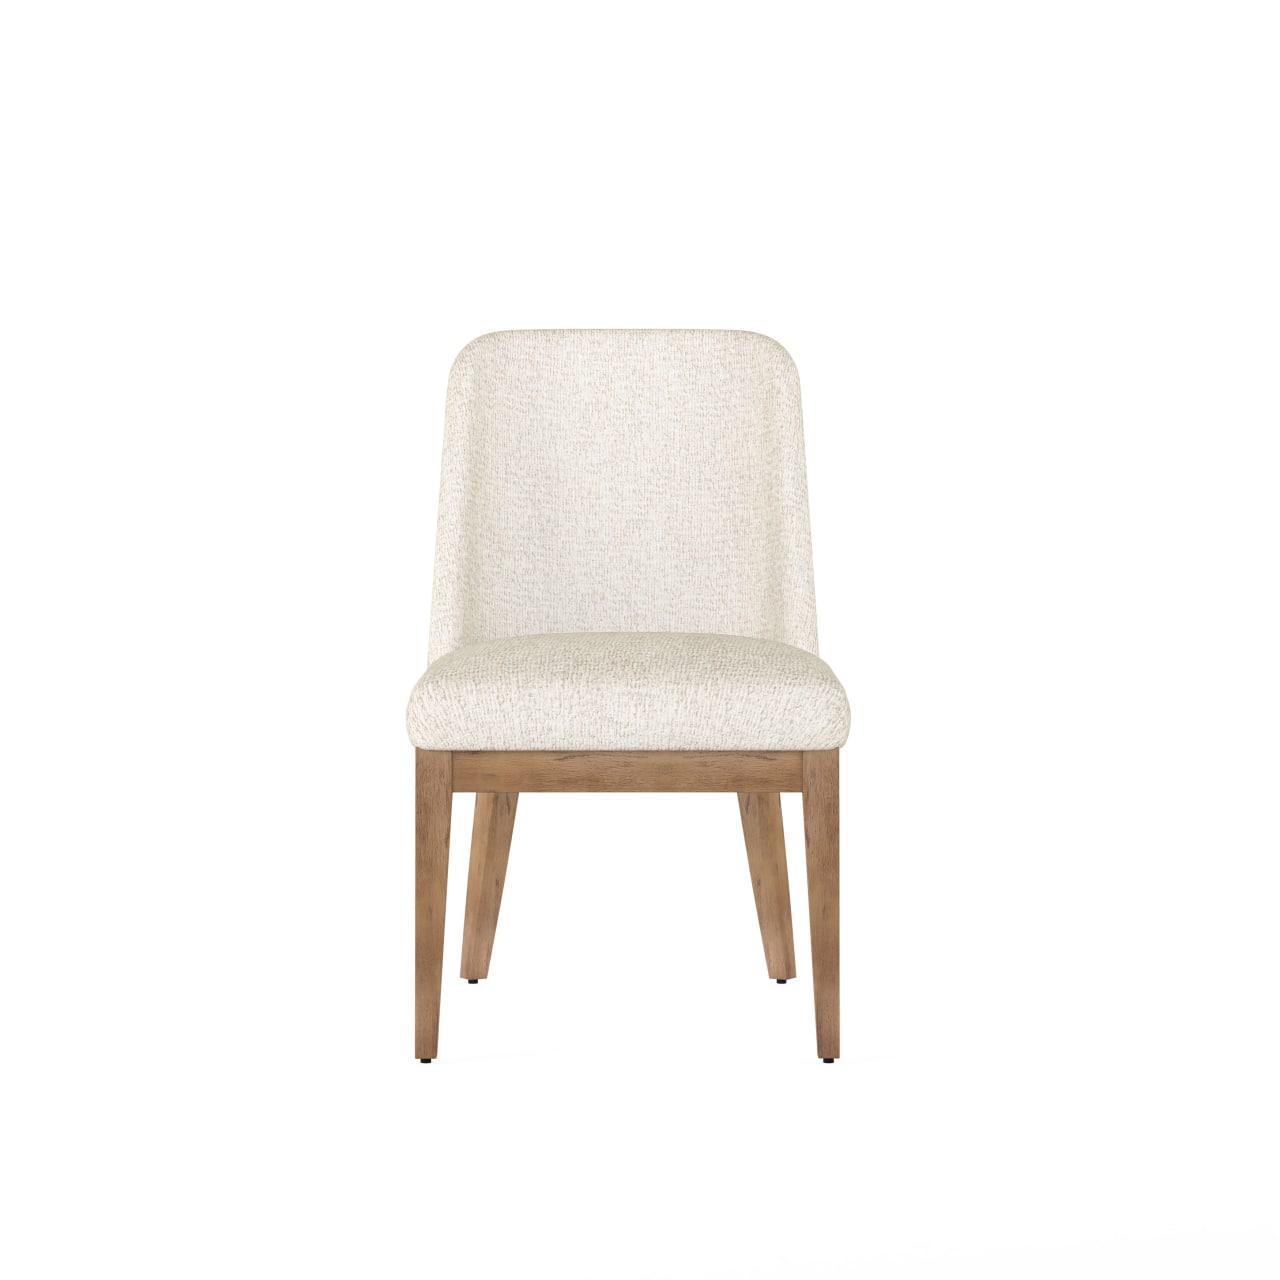 Traditional, Casual Dining Chair Set Portico 323204-3335 in White, Brown 